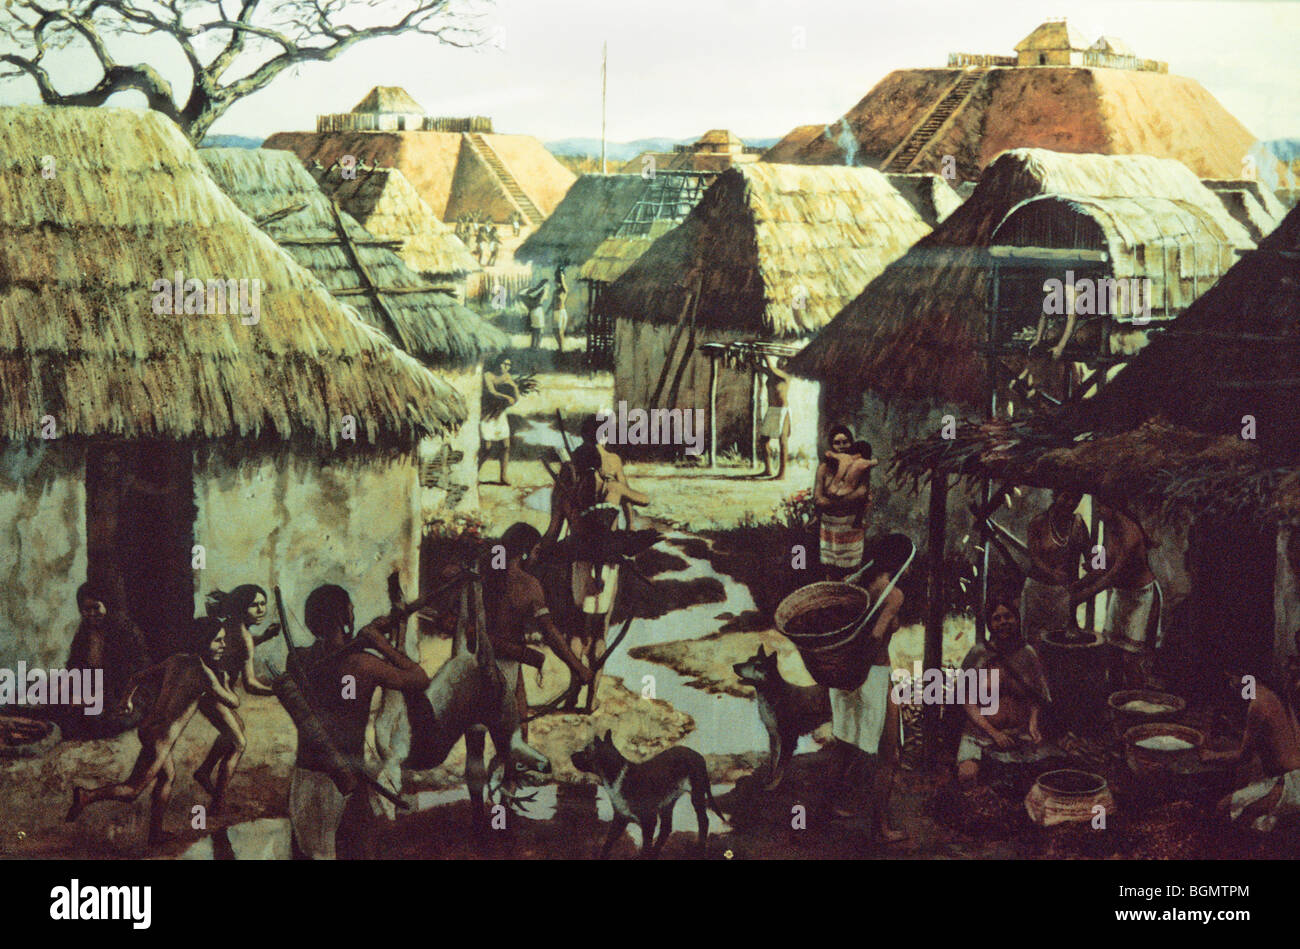 Mural of a typical Mississippian Period village and what Etowah Indian Mounds daily life would have been 1000-1500 A.D., Cartersville Georgia Stock Photo